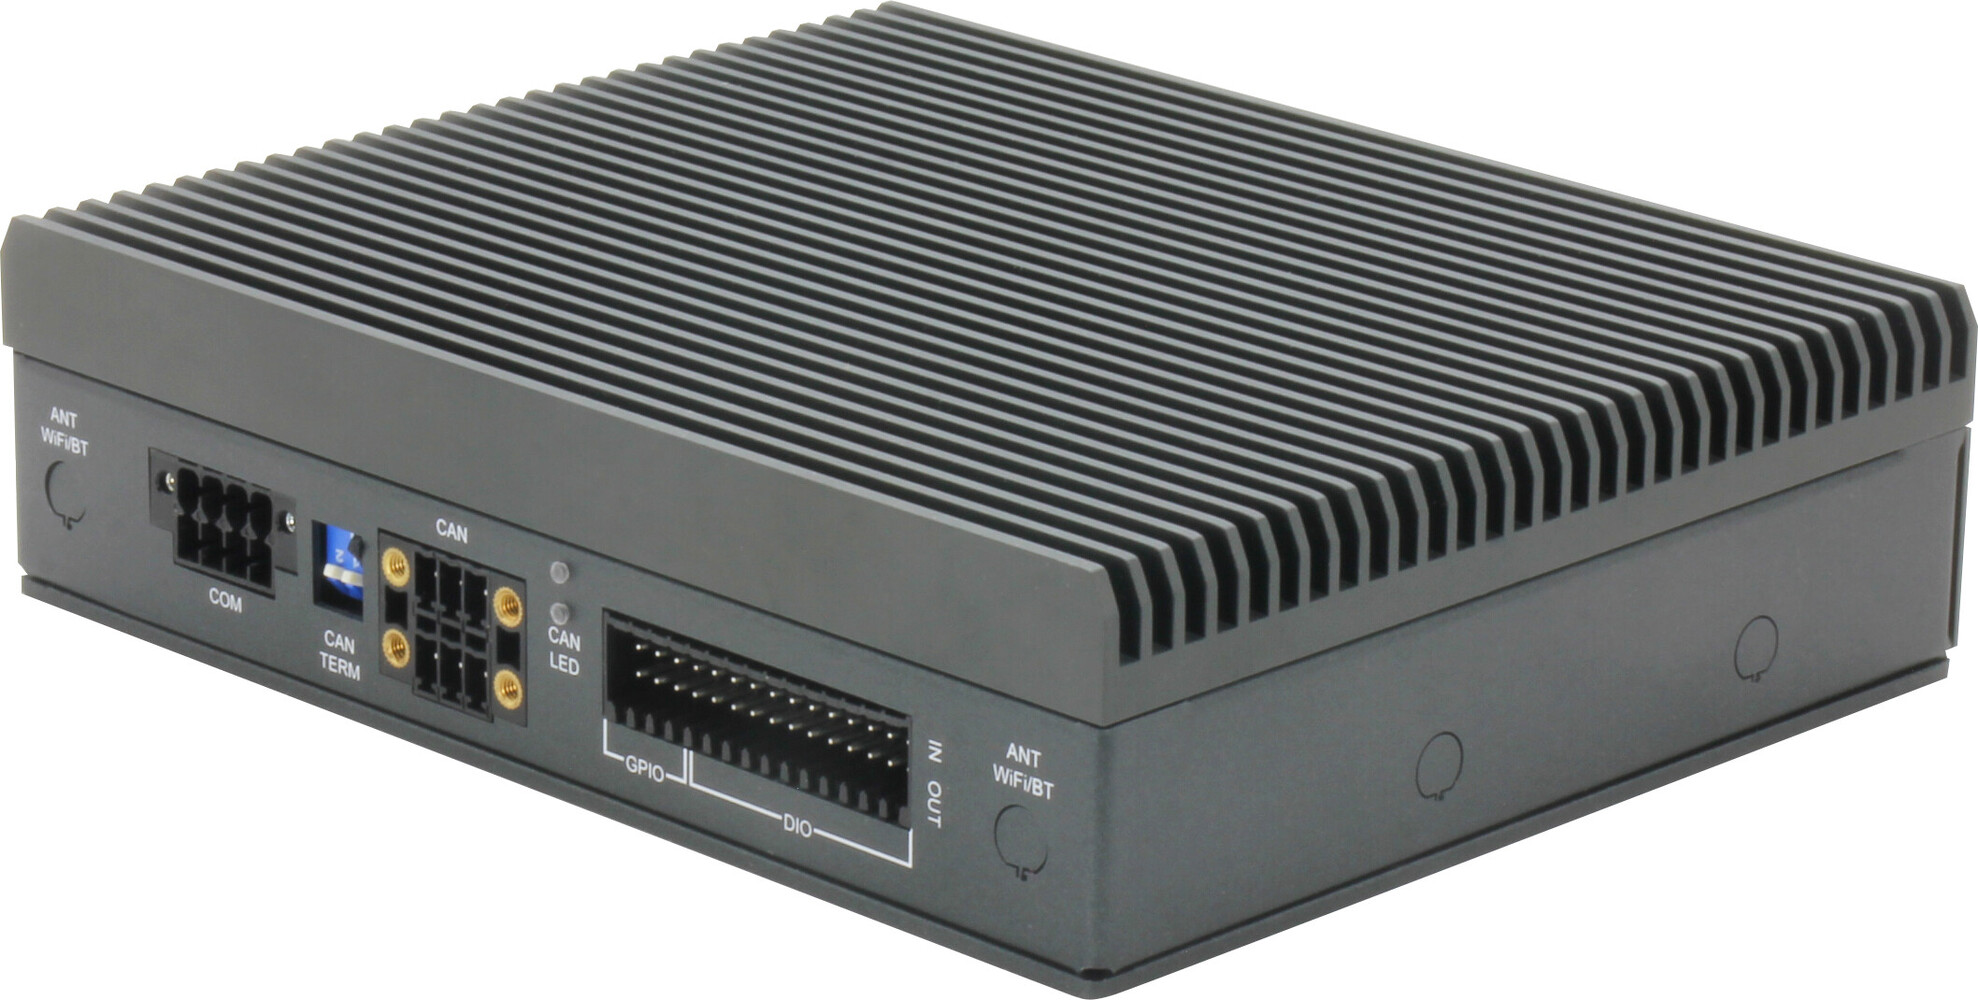 AAEON Reveals UP Xtreme 7100 Mini PC: A Innovation